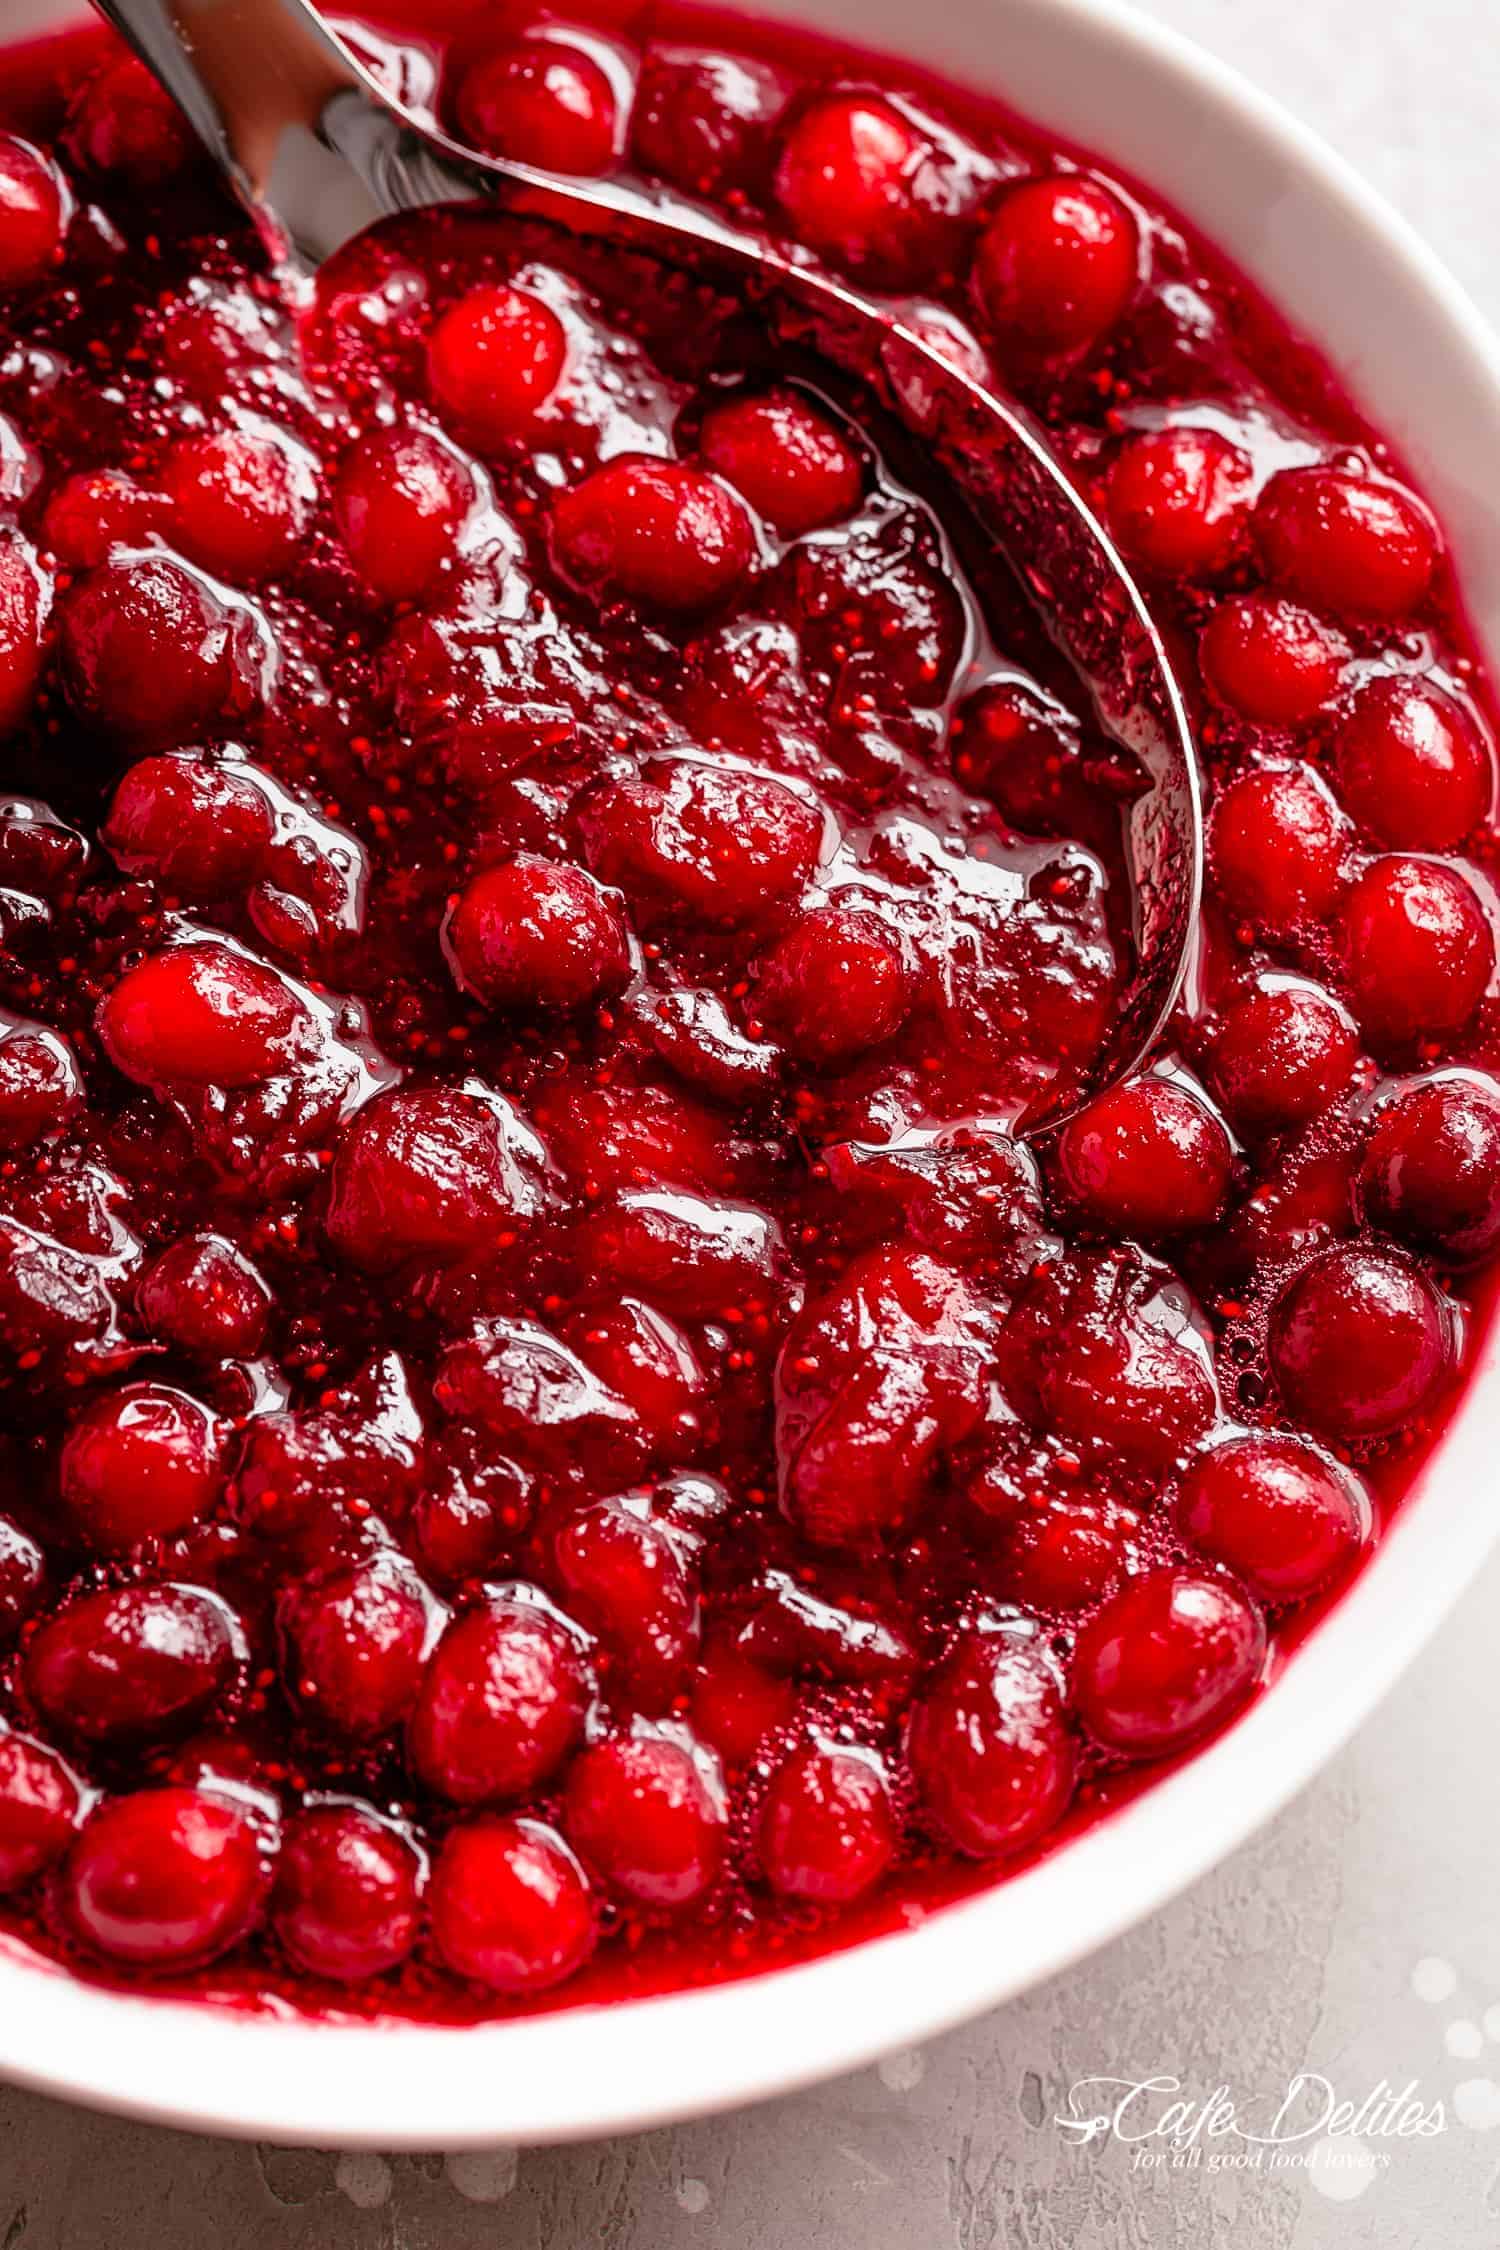  the perfect Homemade Cranberry Sauce to pour all over your Roast Turkey Cranberry Sauce